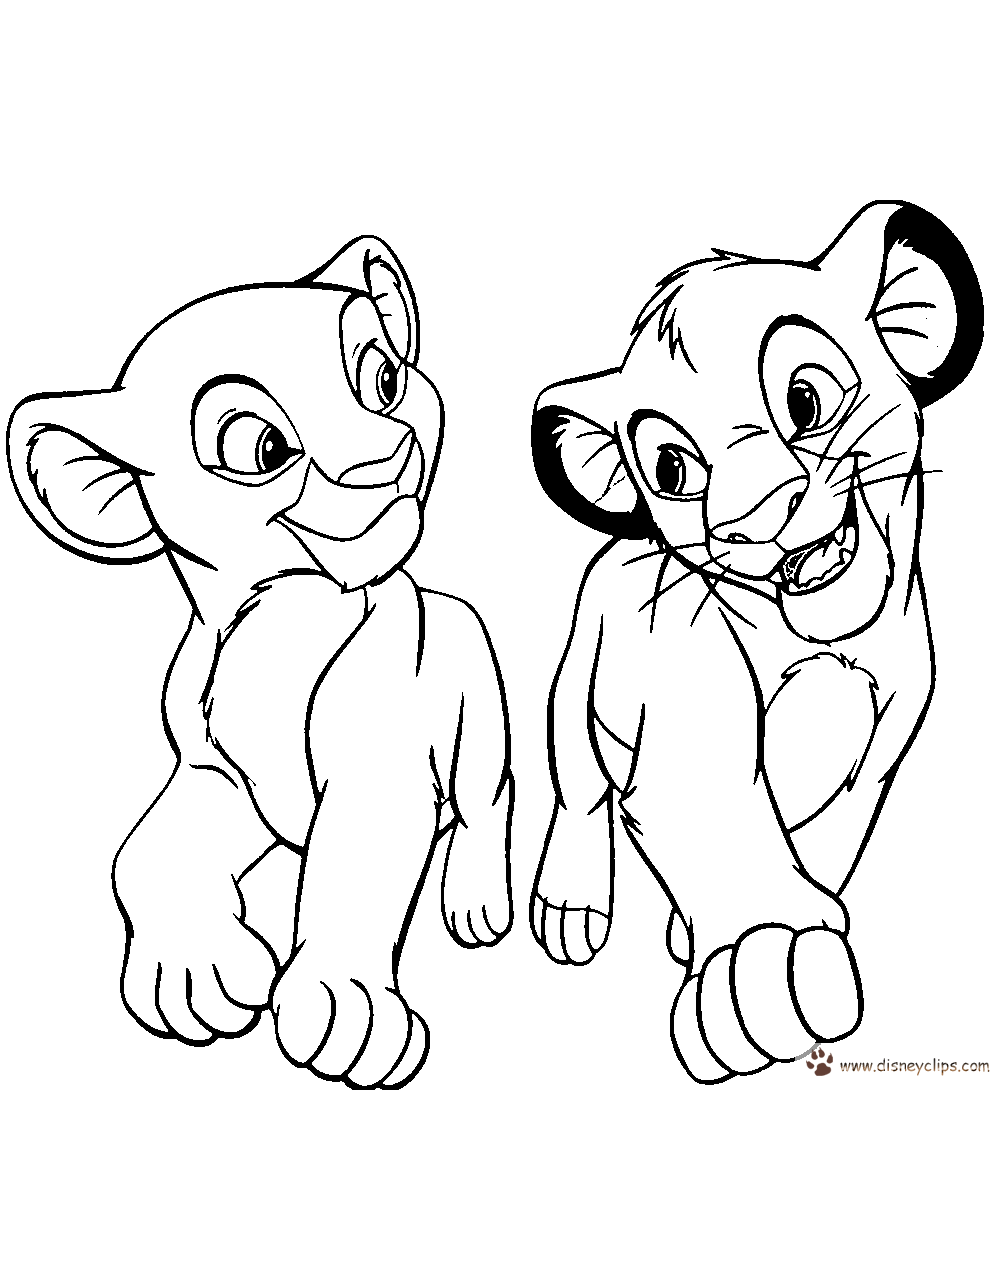 The Lion King Coloring Pages | Disney Coloring Book